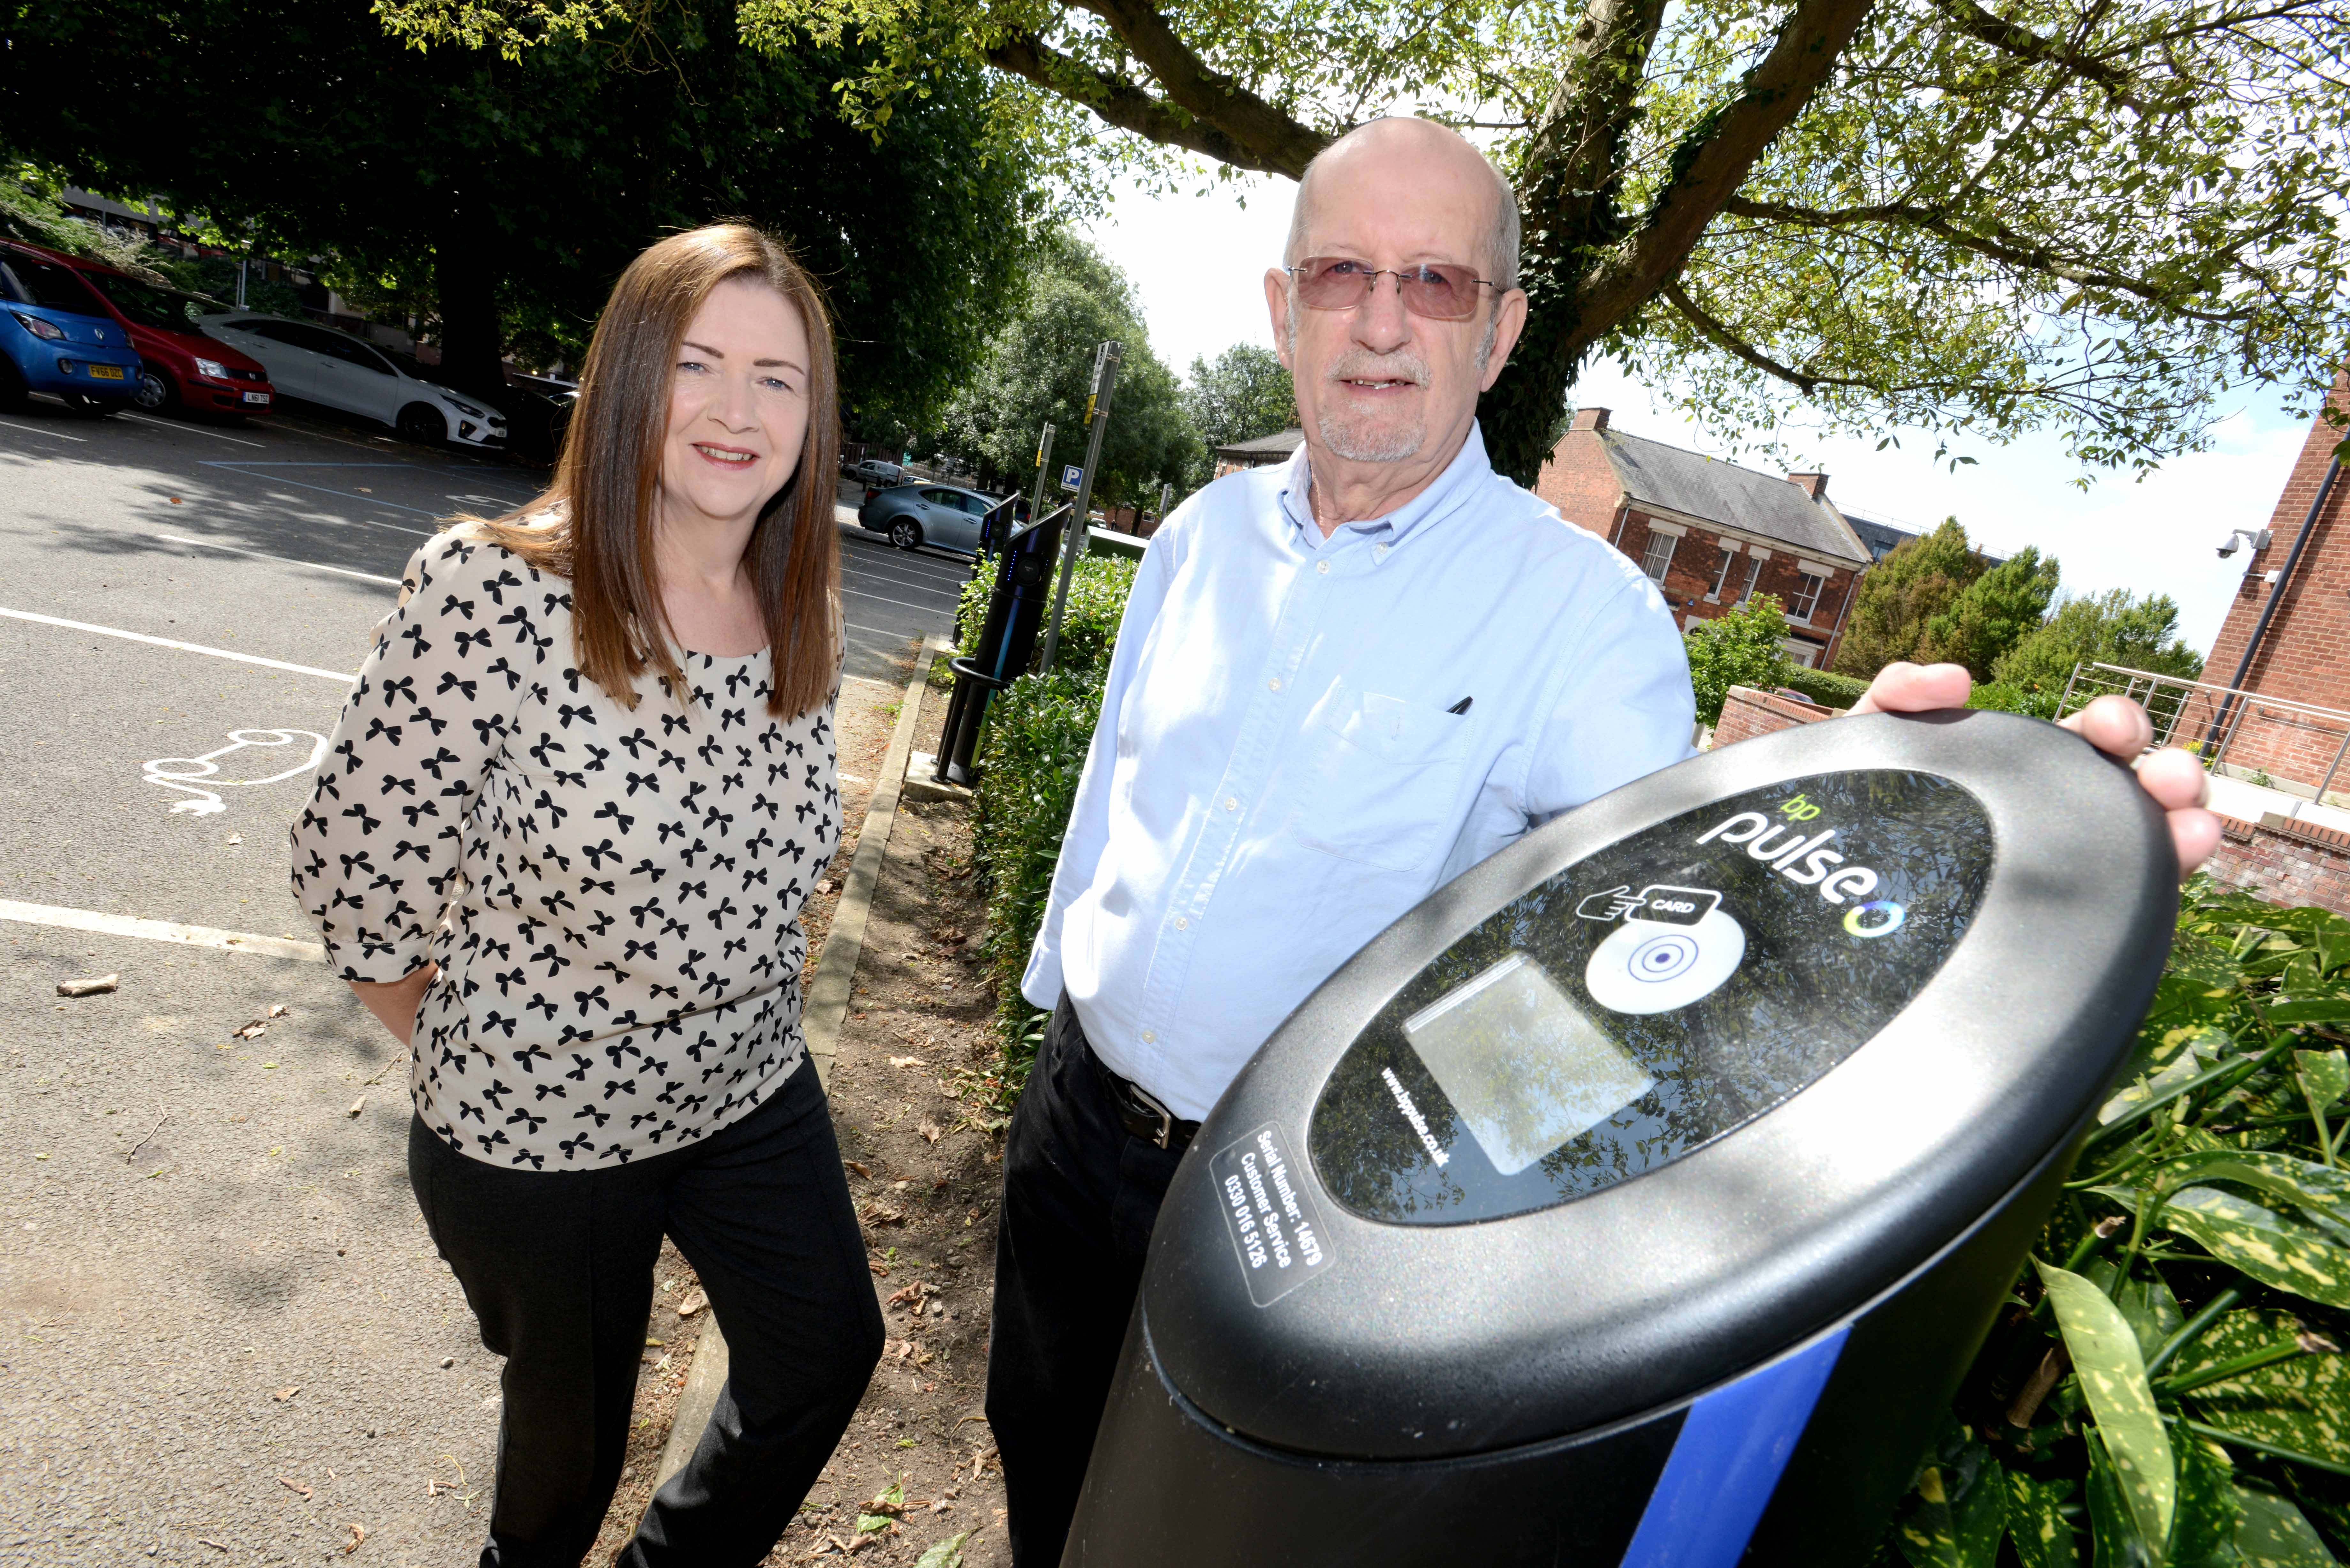 Lorraine Burrows and Cllr Bob Bushell at the City Hall EV Charging Points